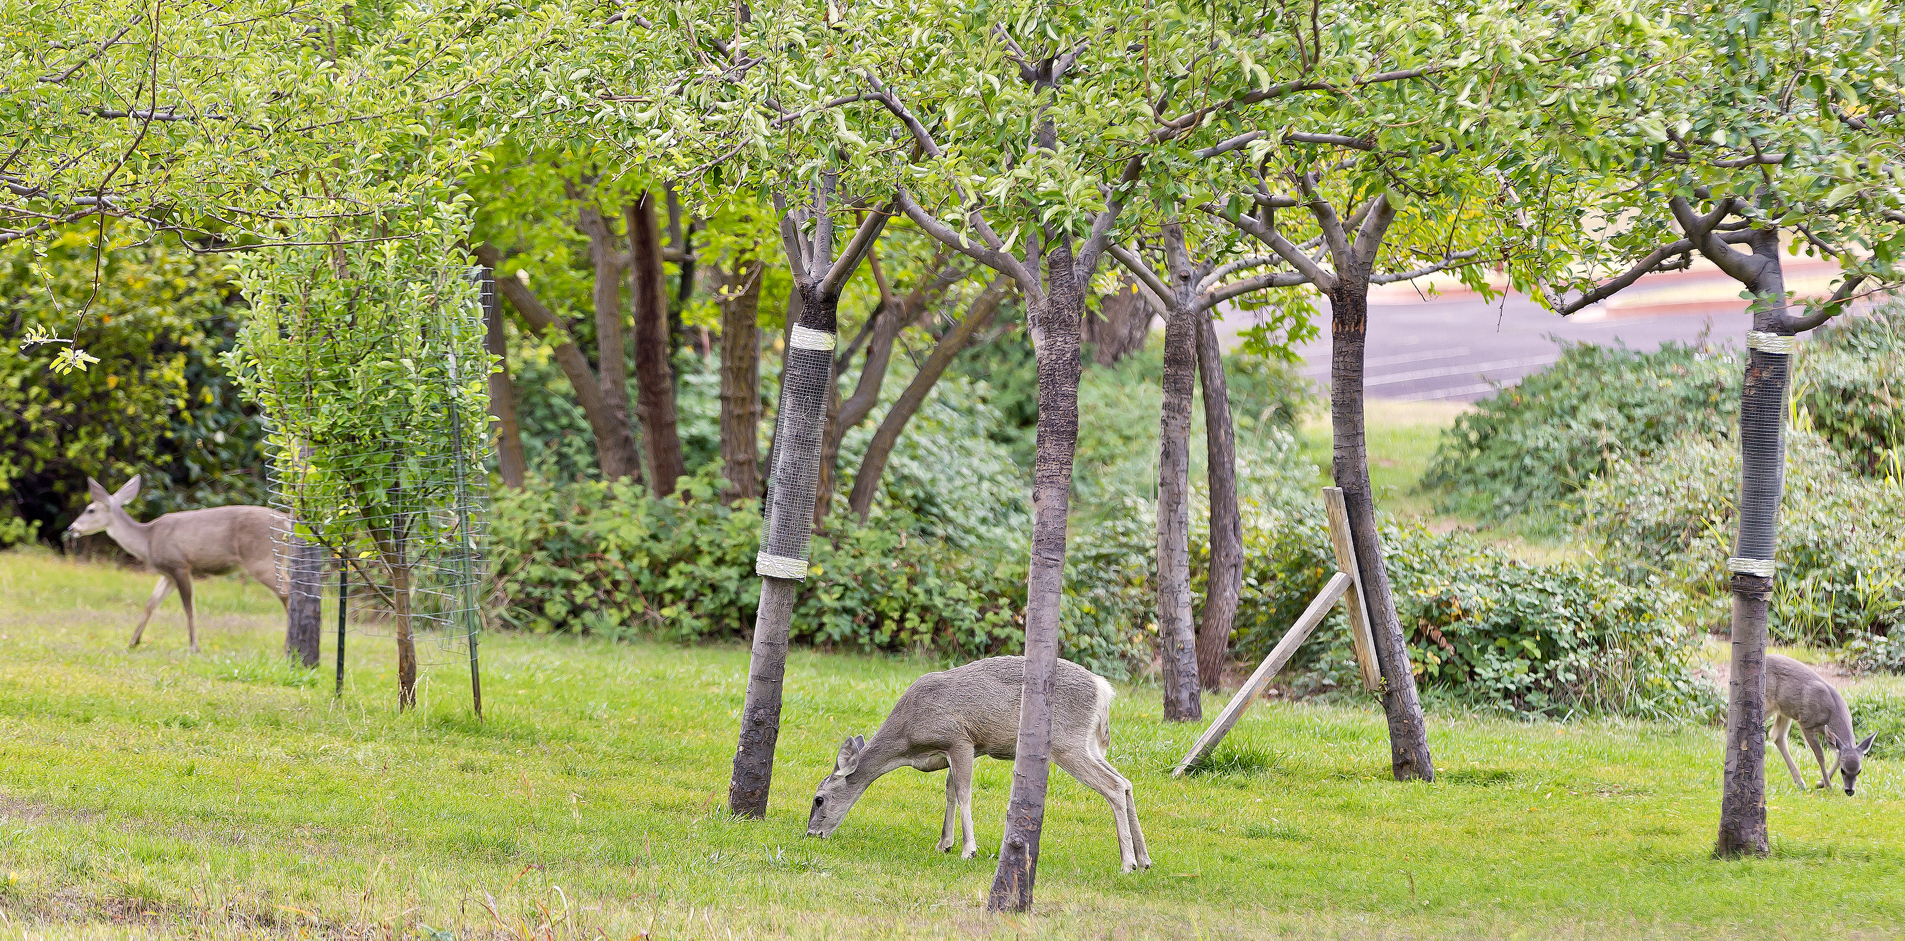 Deer graze on the lawn at Tonto Natural Bridge State Park